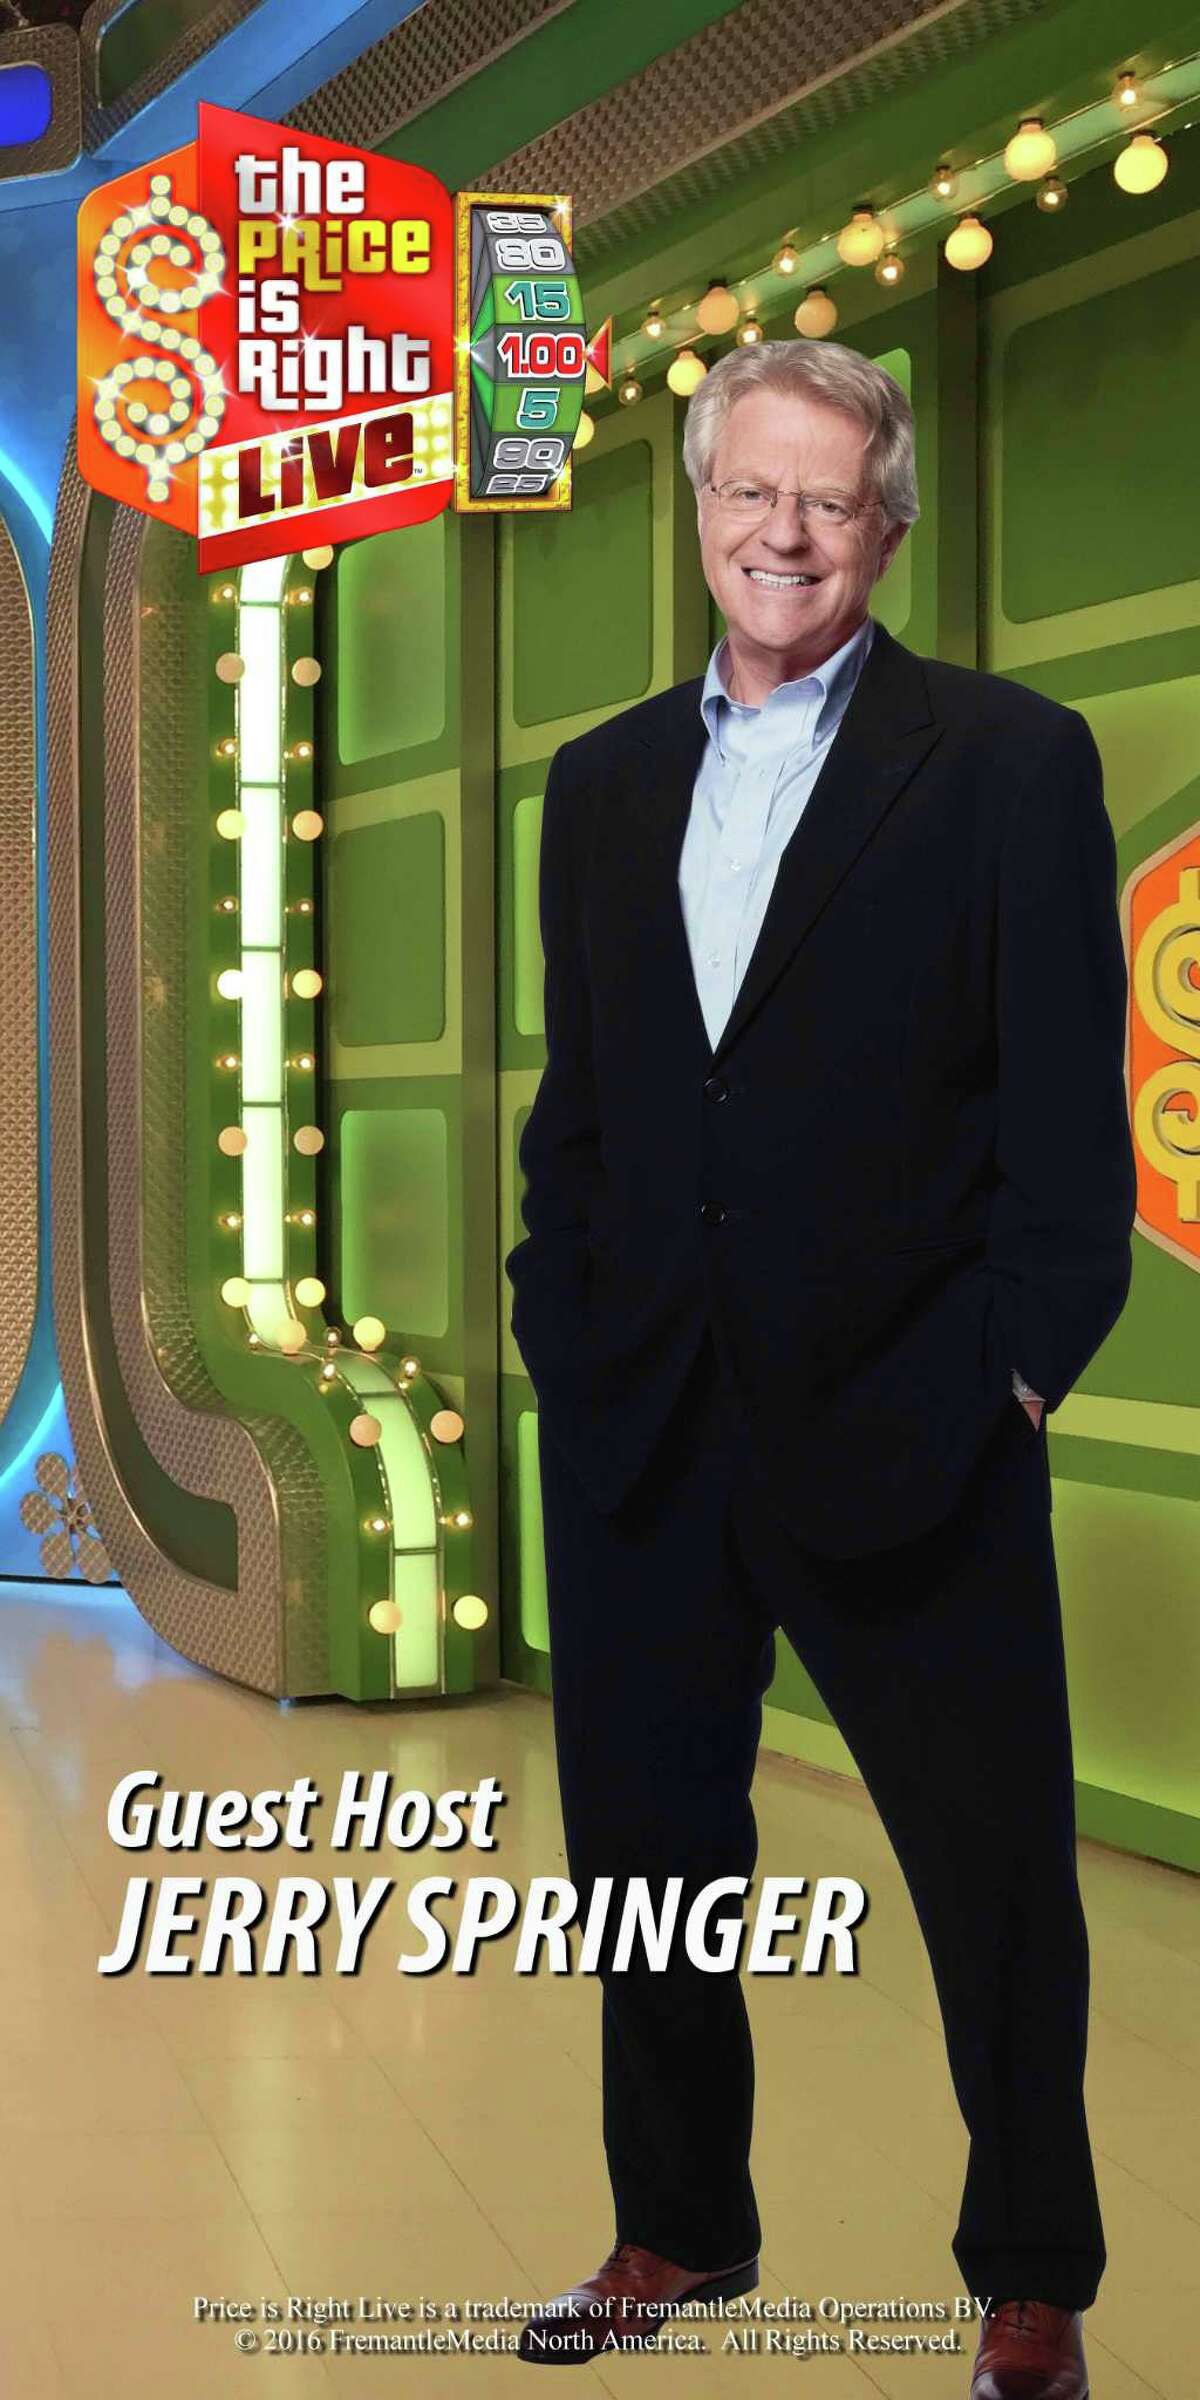 Jerry Springer will be the guest host of The Price is Right at the Palace in Waterbury.